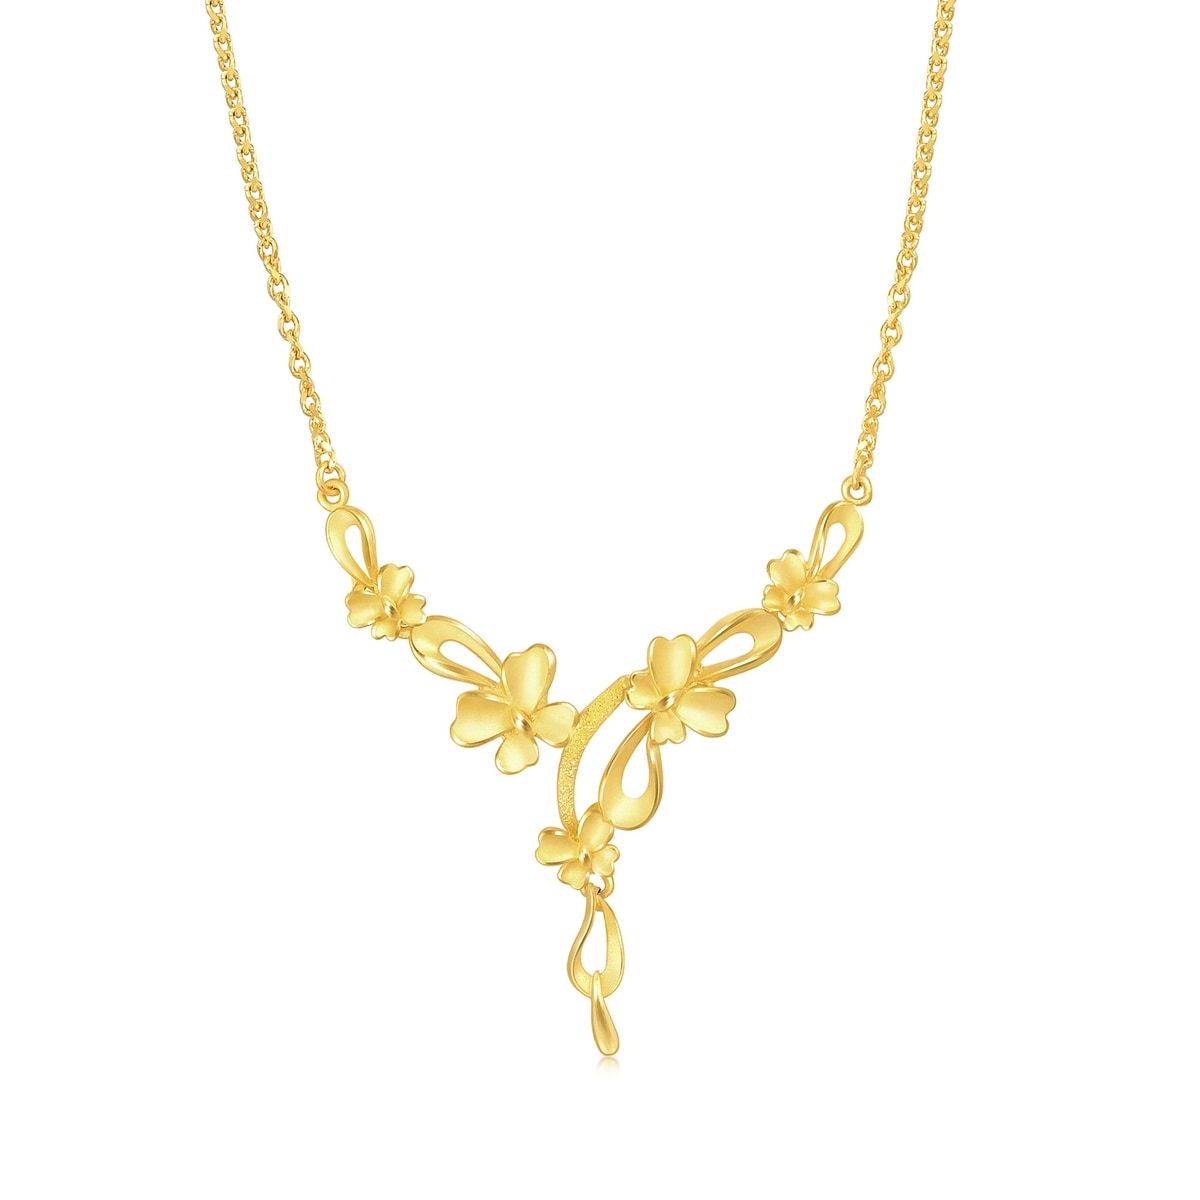 999.9 Gold Necklace(335900-WT-0.3030) | Chow Sang Sang Jewellery